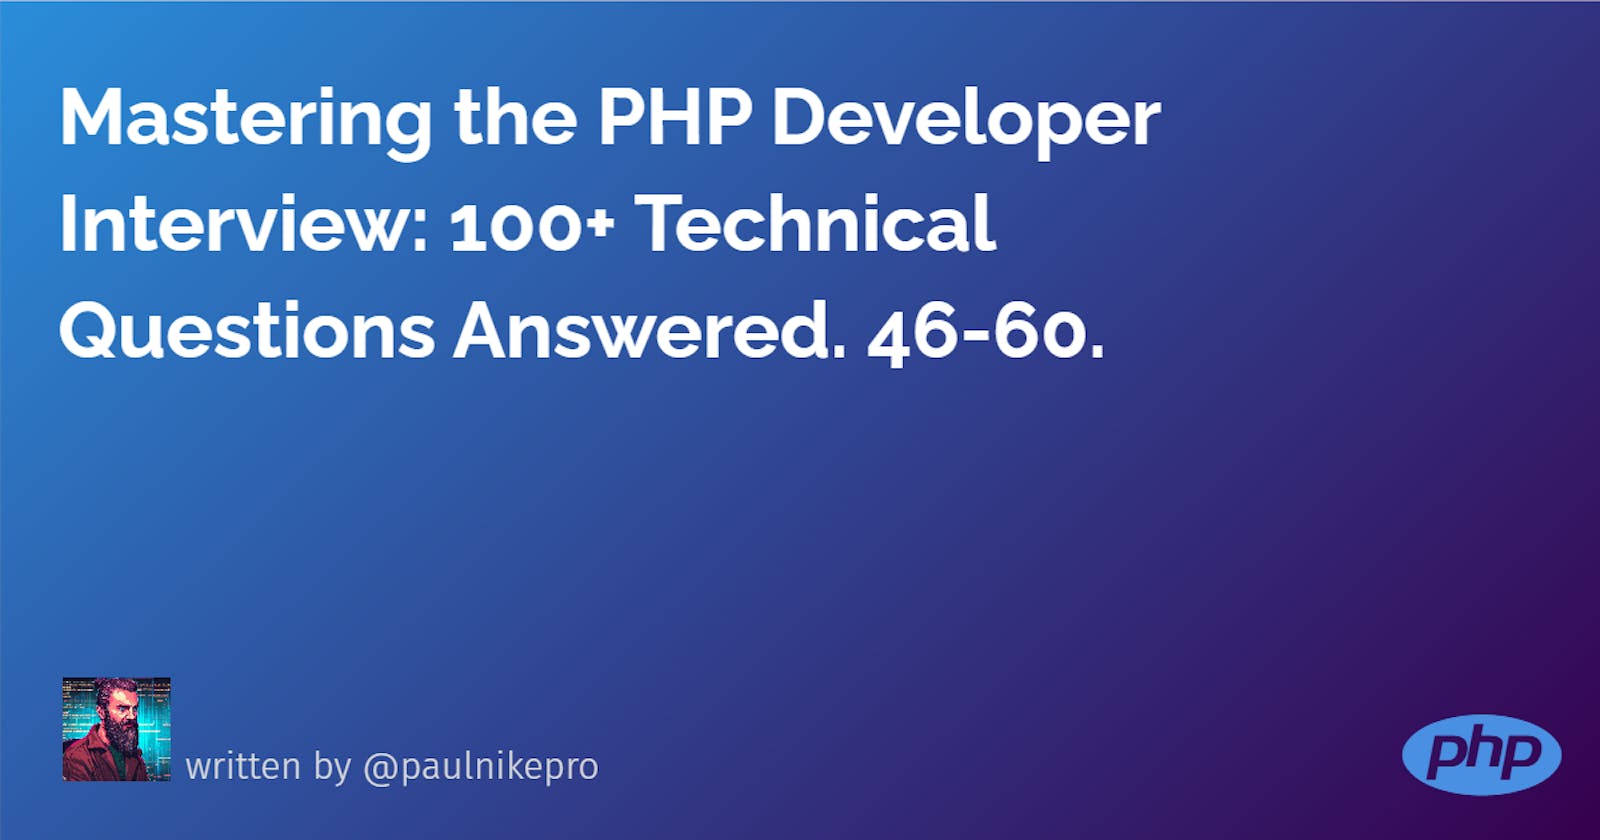 Mastering the PHP Developer Interview: 100+ Technical Questions Answered. 46-60.